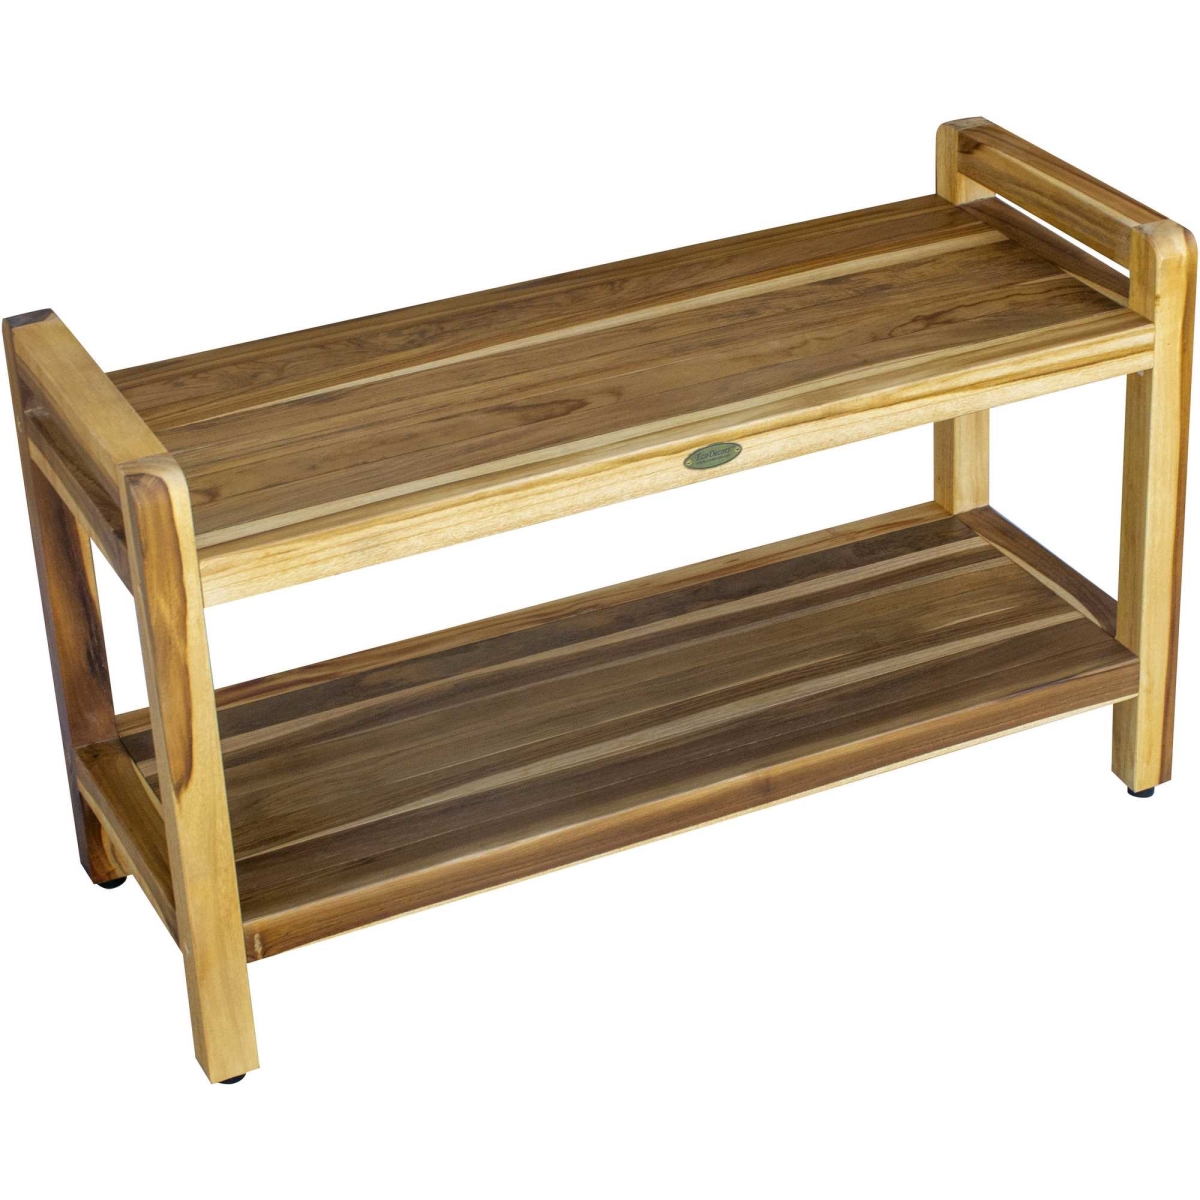 Picture of HomeRoots 376738 Rectangular Teak Shower Bench with Handles in Natural Finish